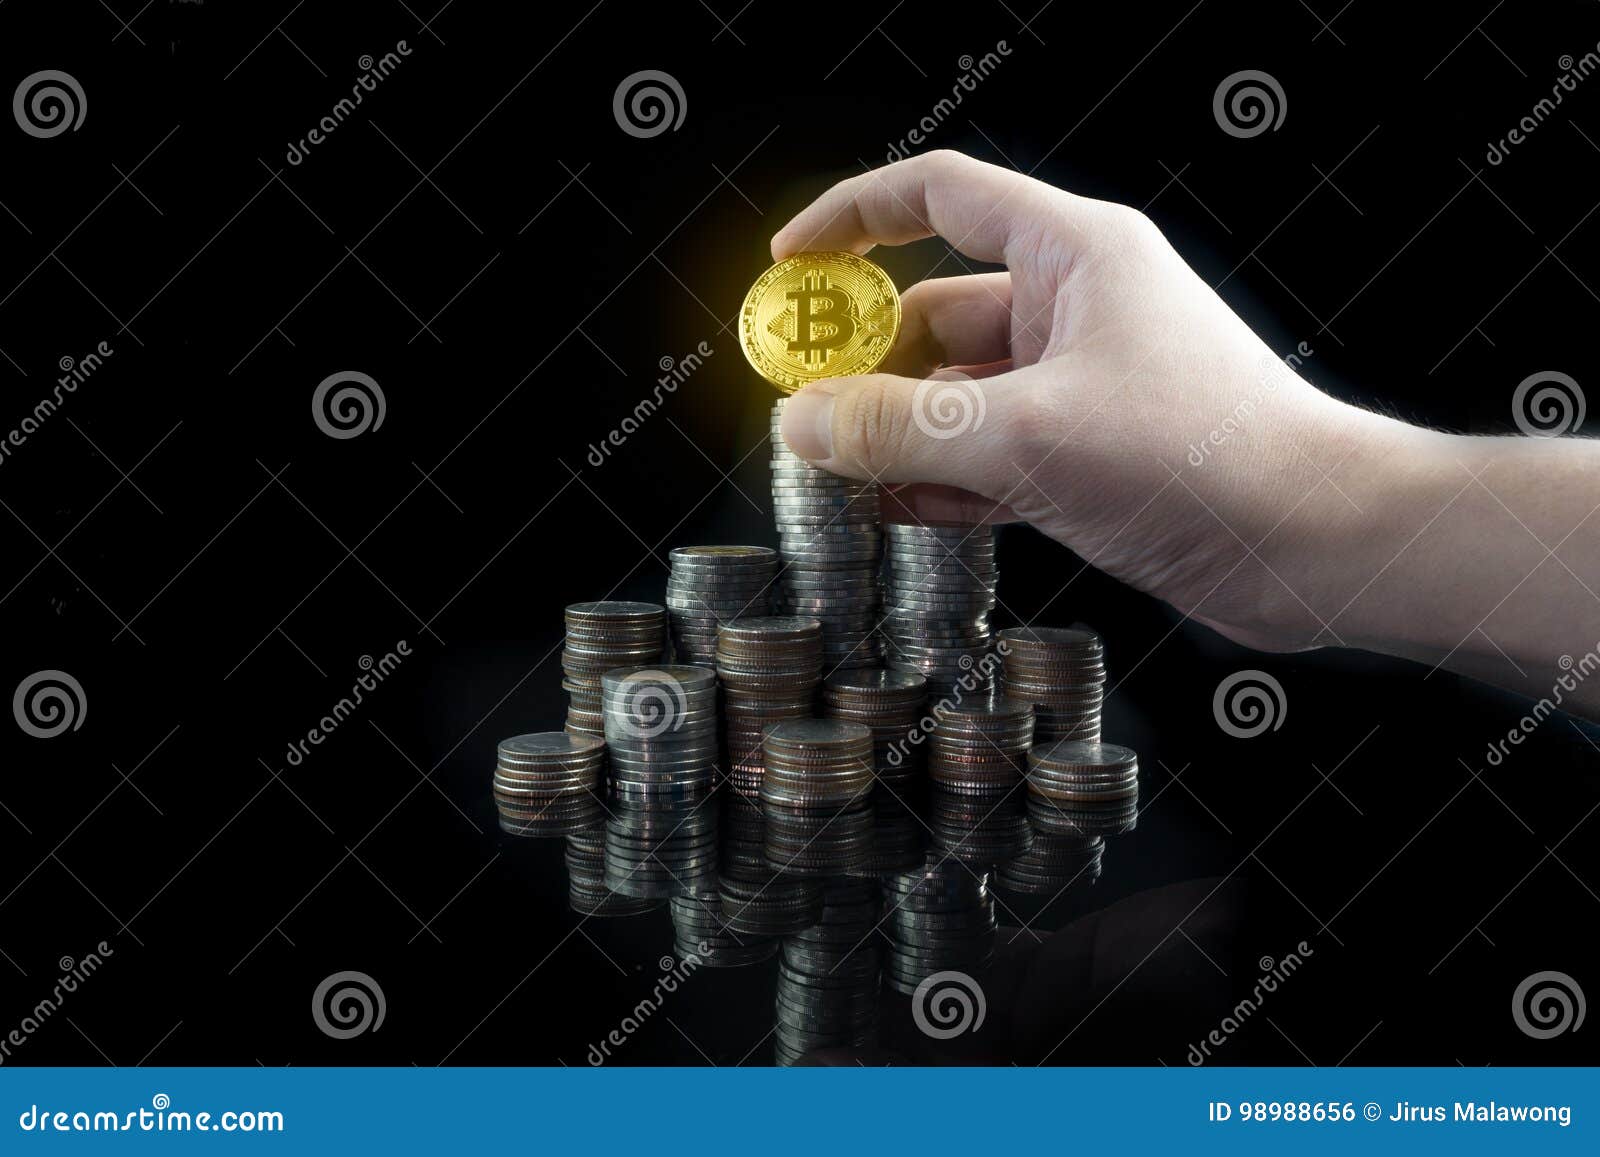 Pile Of Stacking Coins With Shiny Golden Bitcoin On Top ...